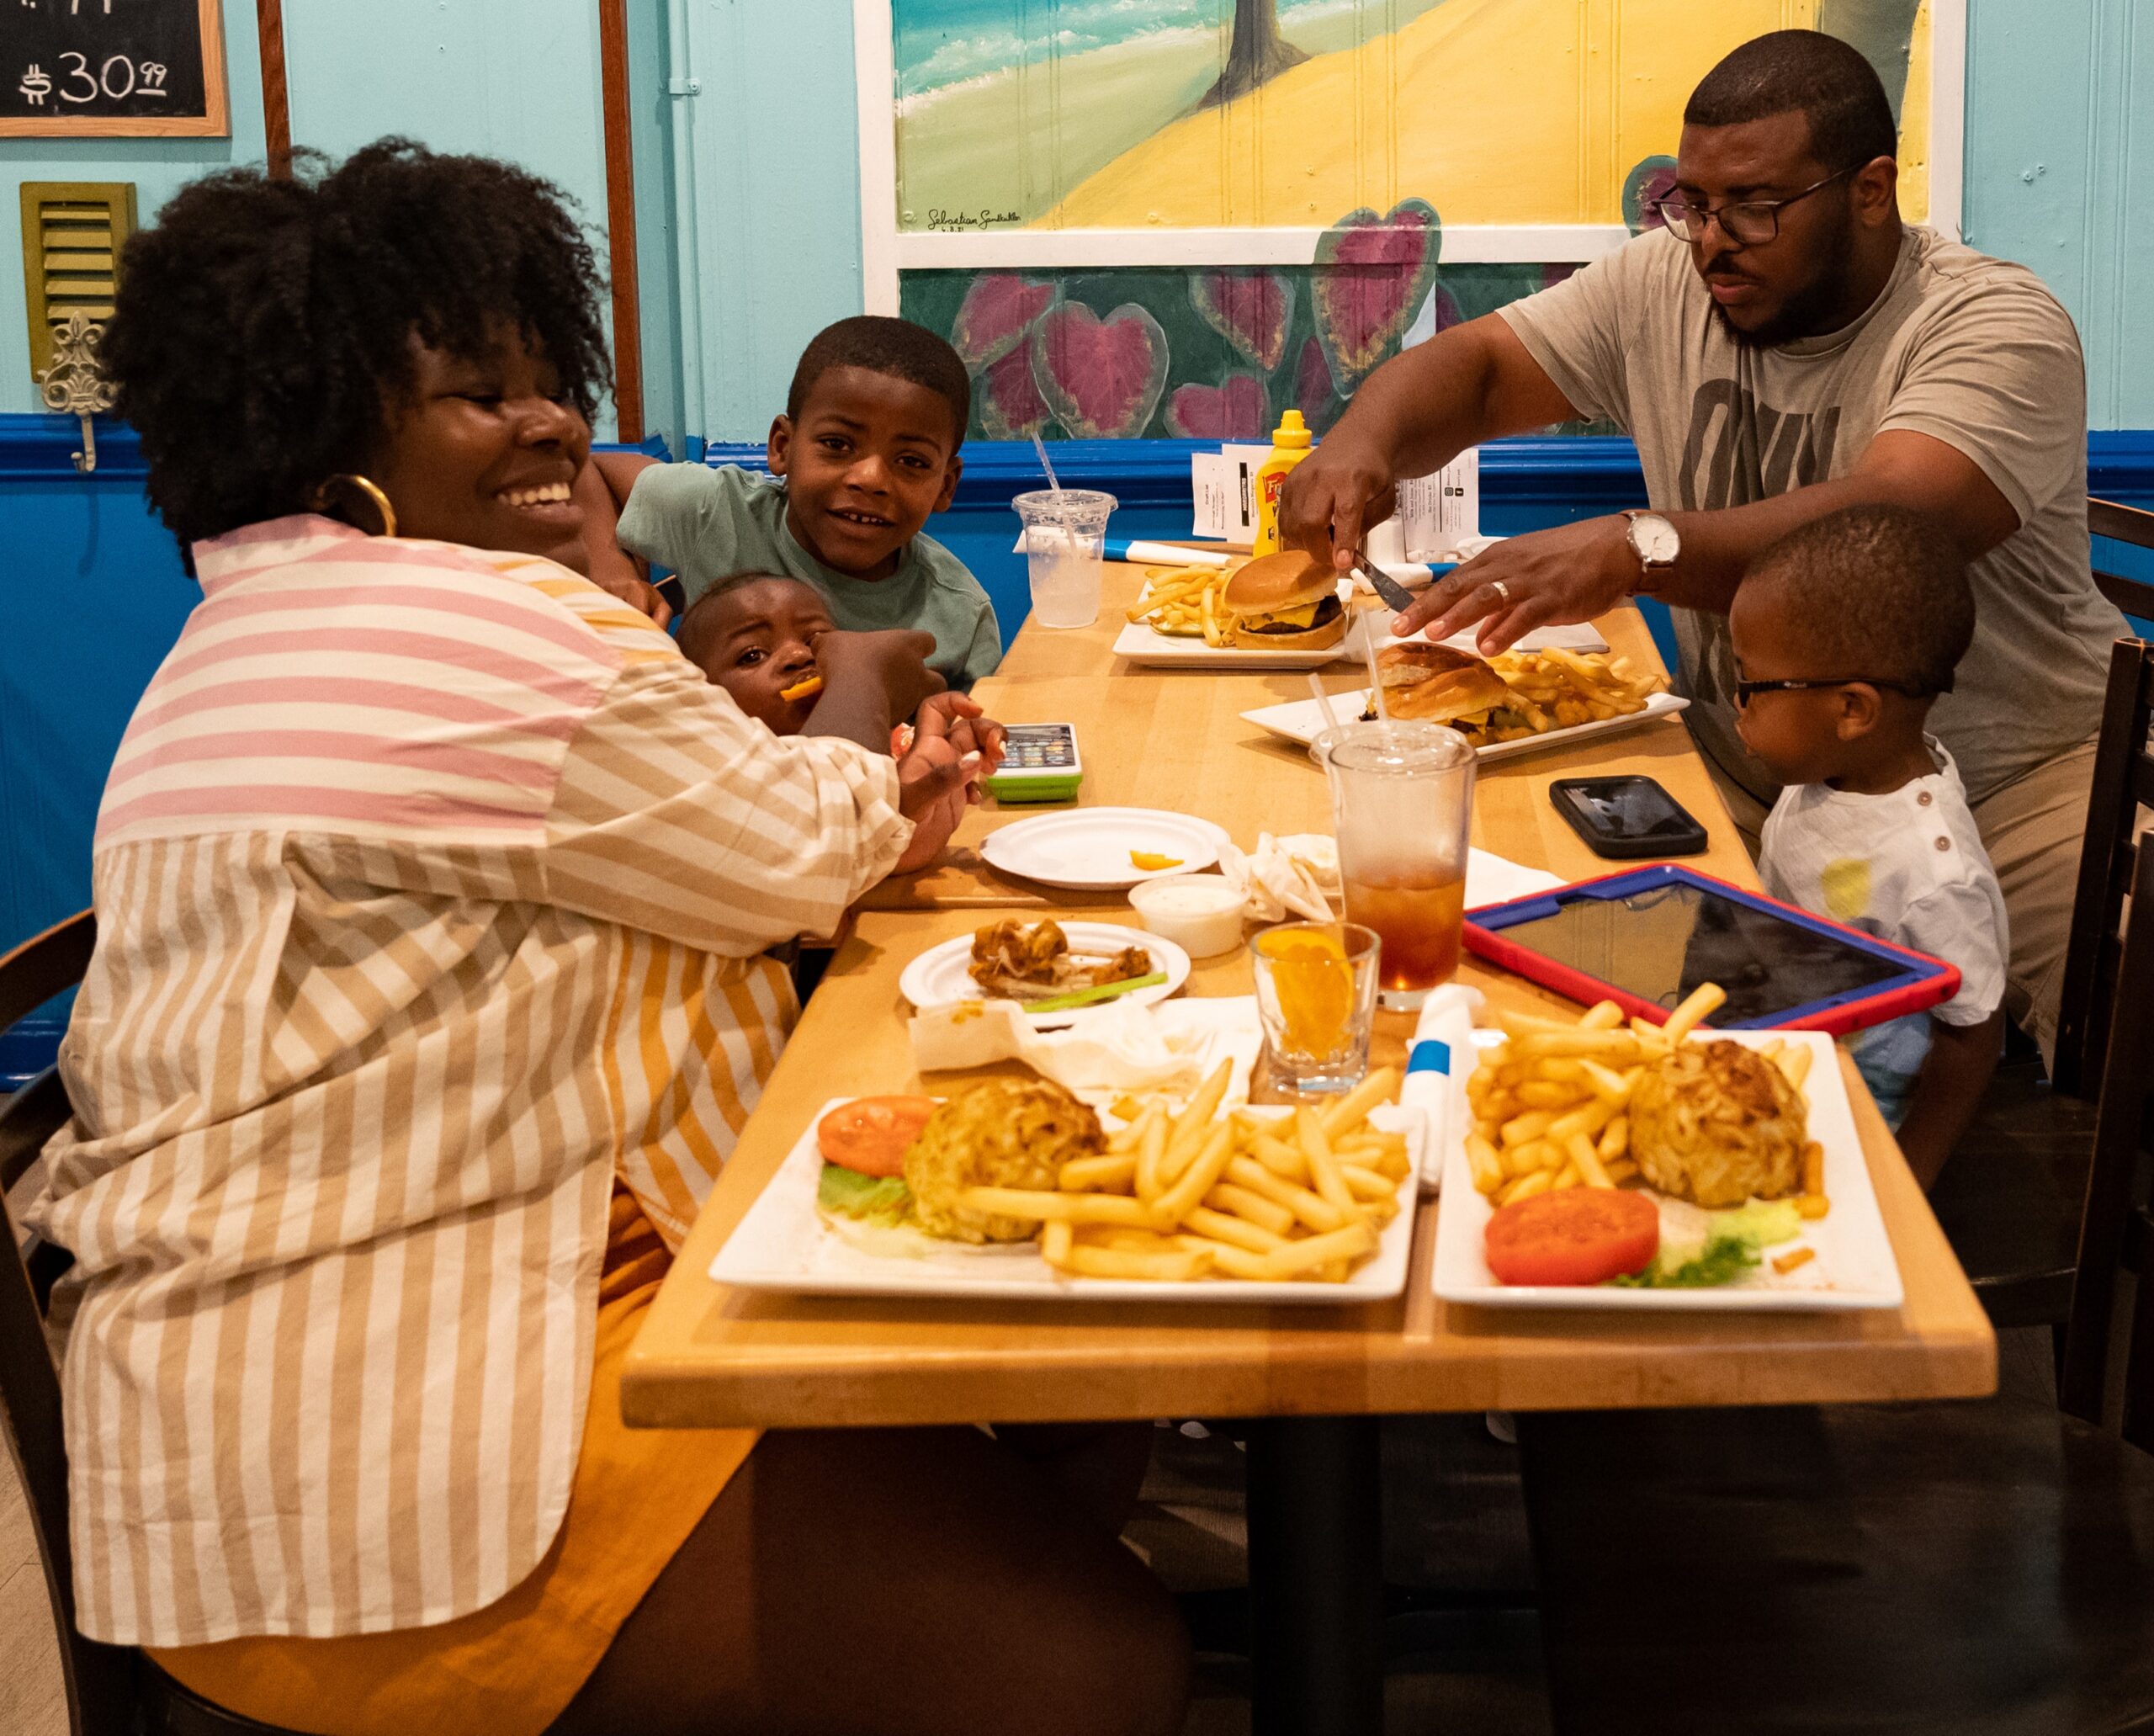 Parents and kids eating at a booth